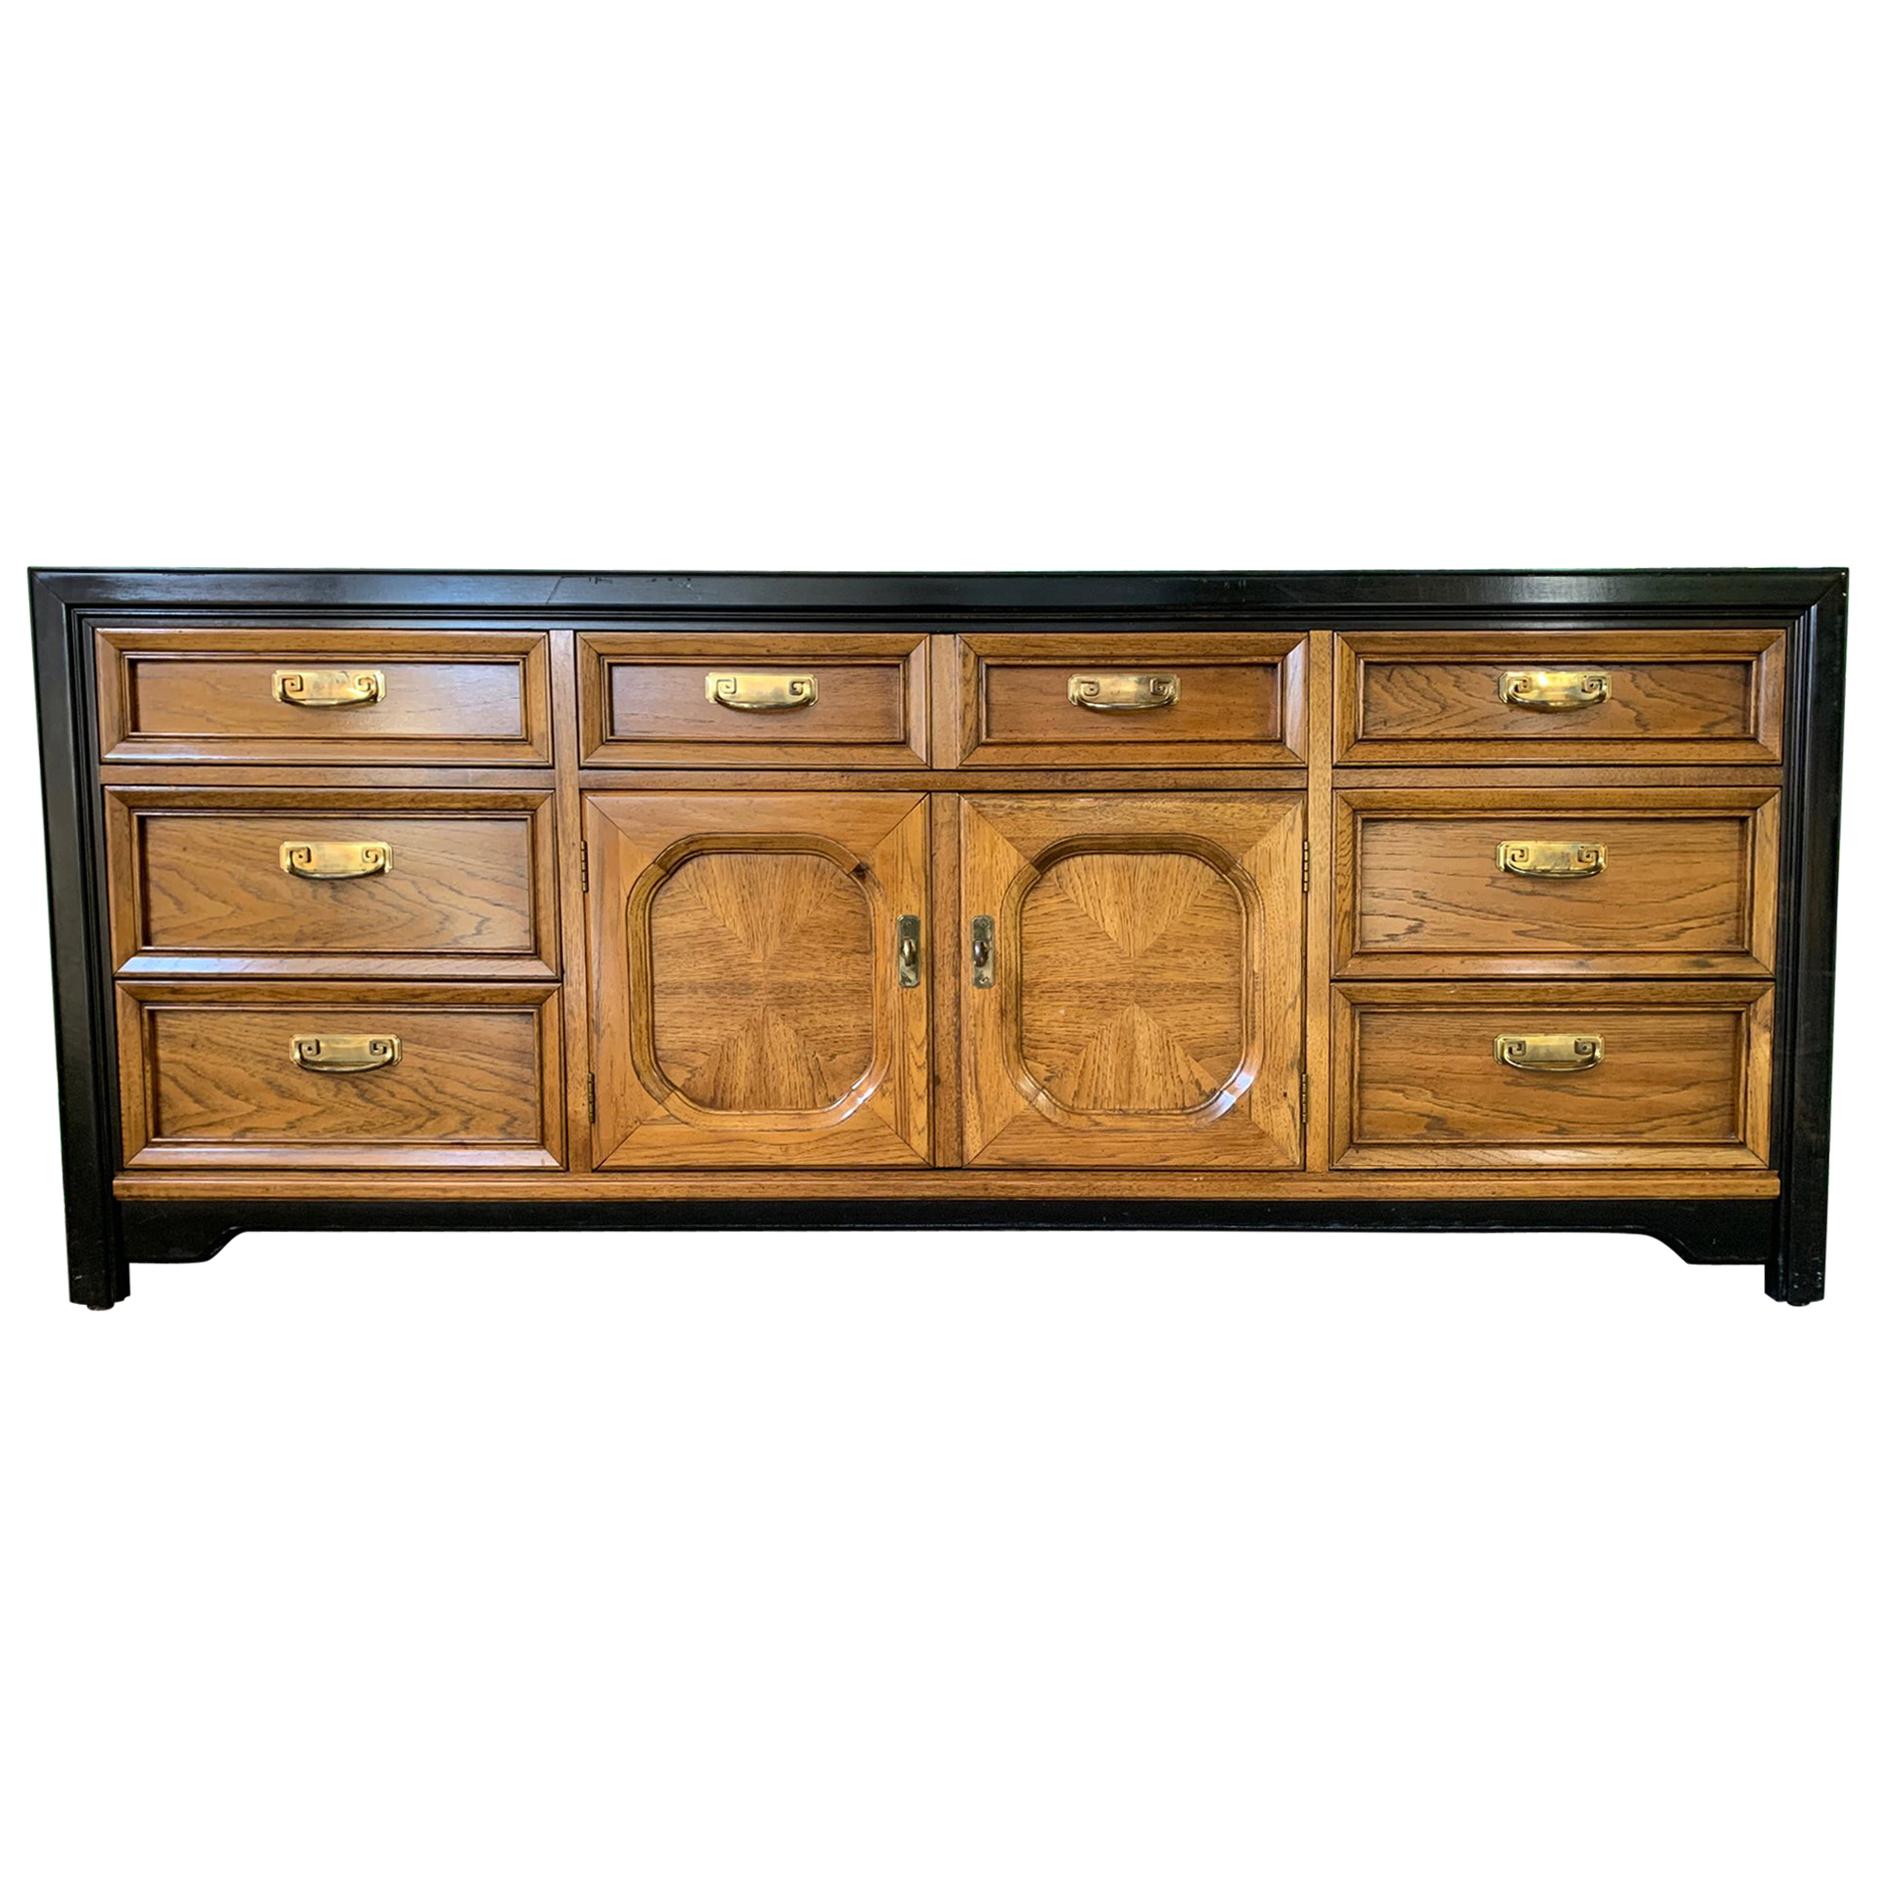 Thomasville Dressers 15 For Sale At 1stdibs